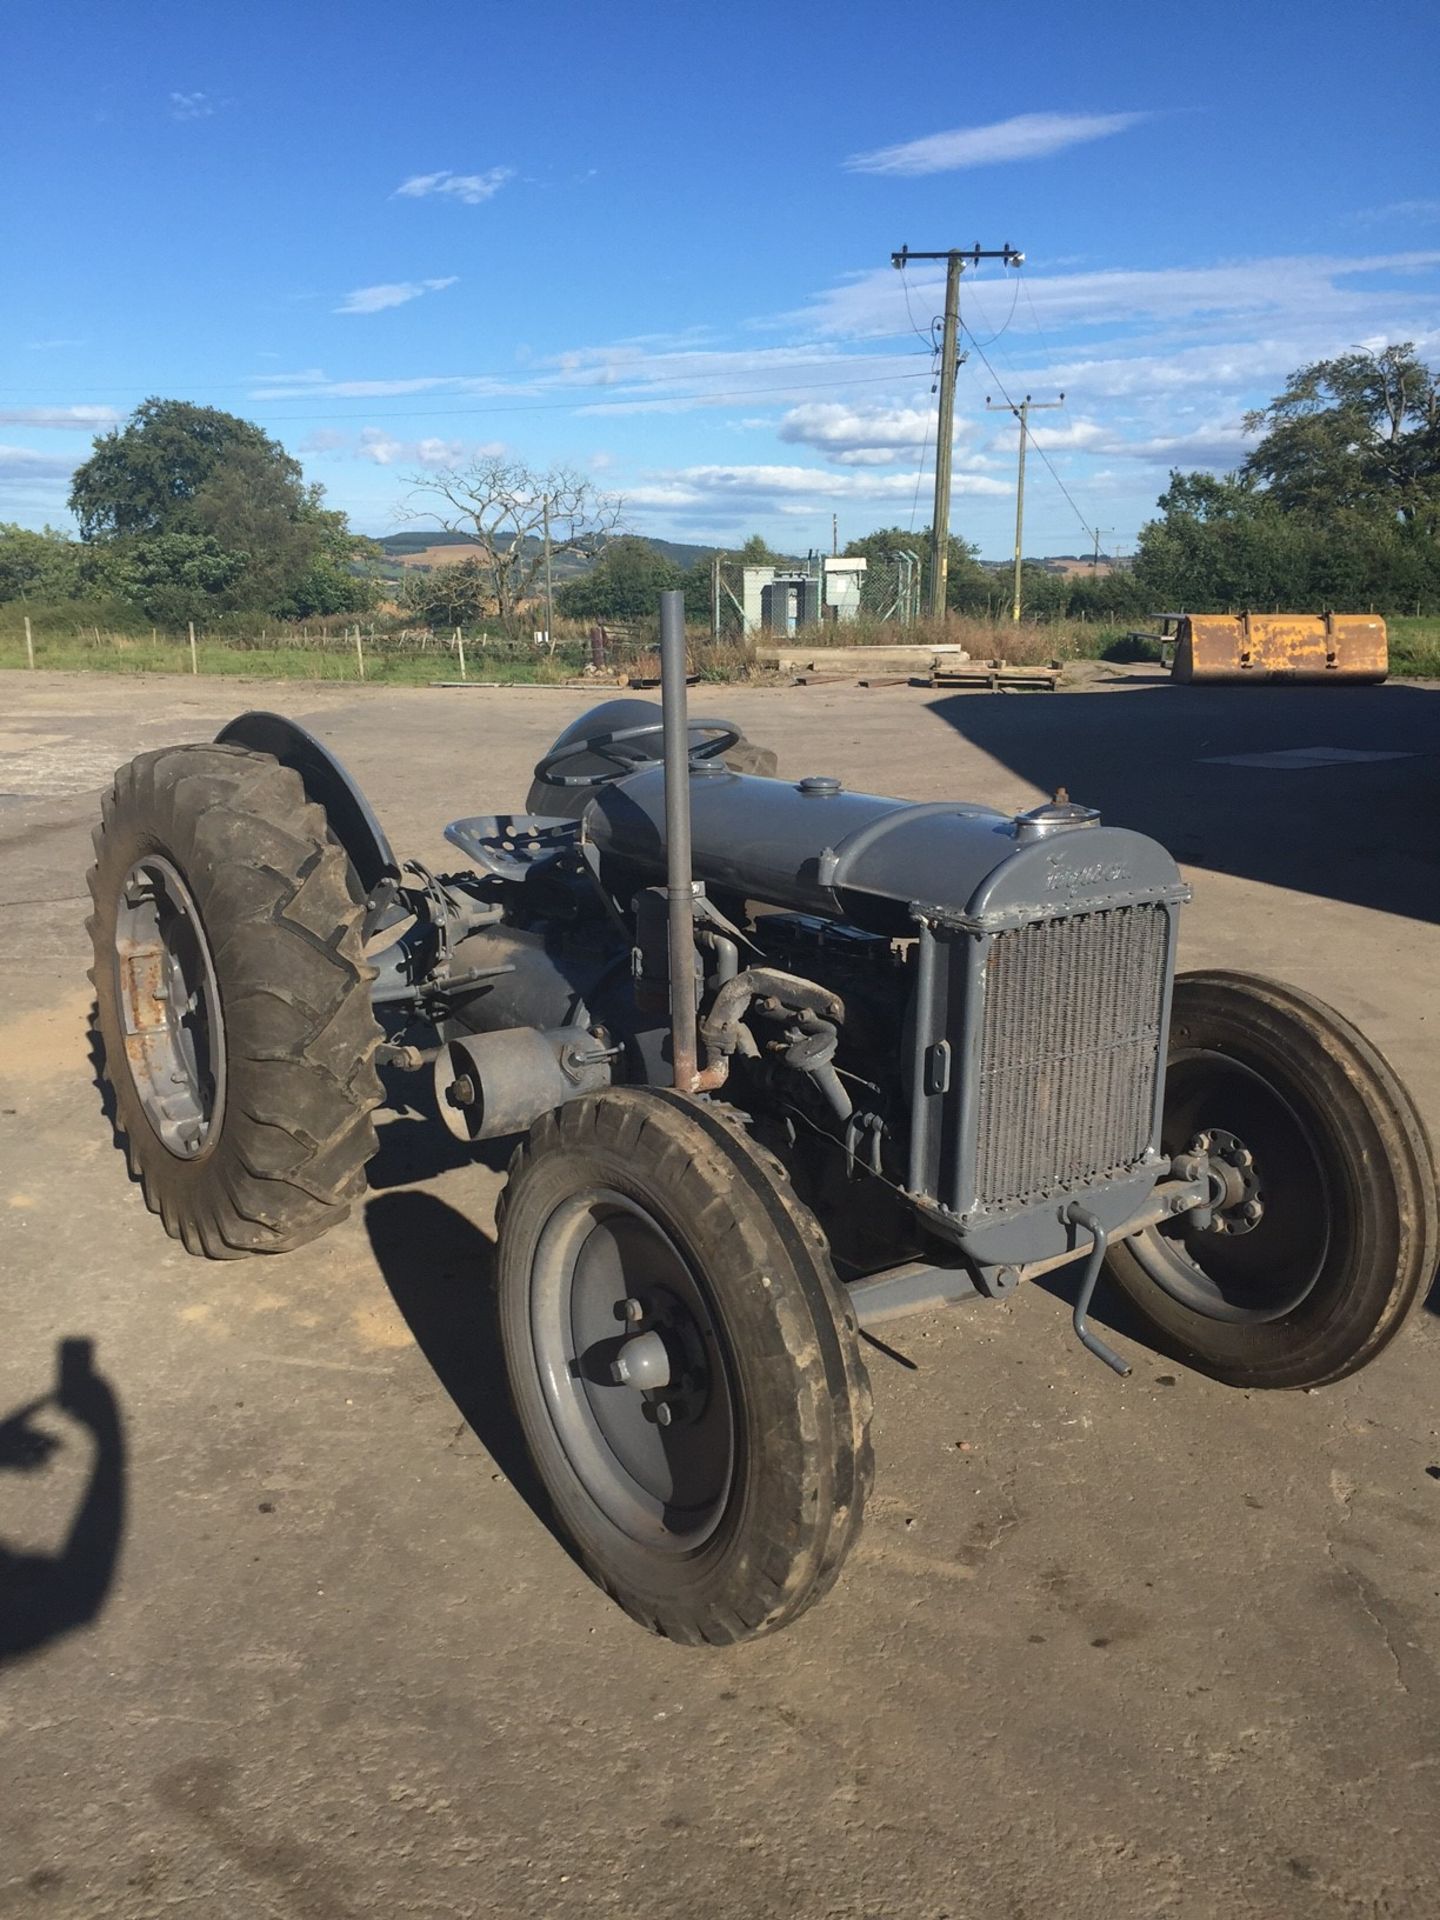 FERGUSON BROWN Type A 4cylinder petrol/paraffin TRACTOR Serial No: 556 Purchased by the vendors - Image 2 of 5